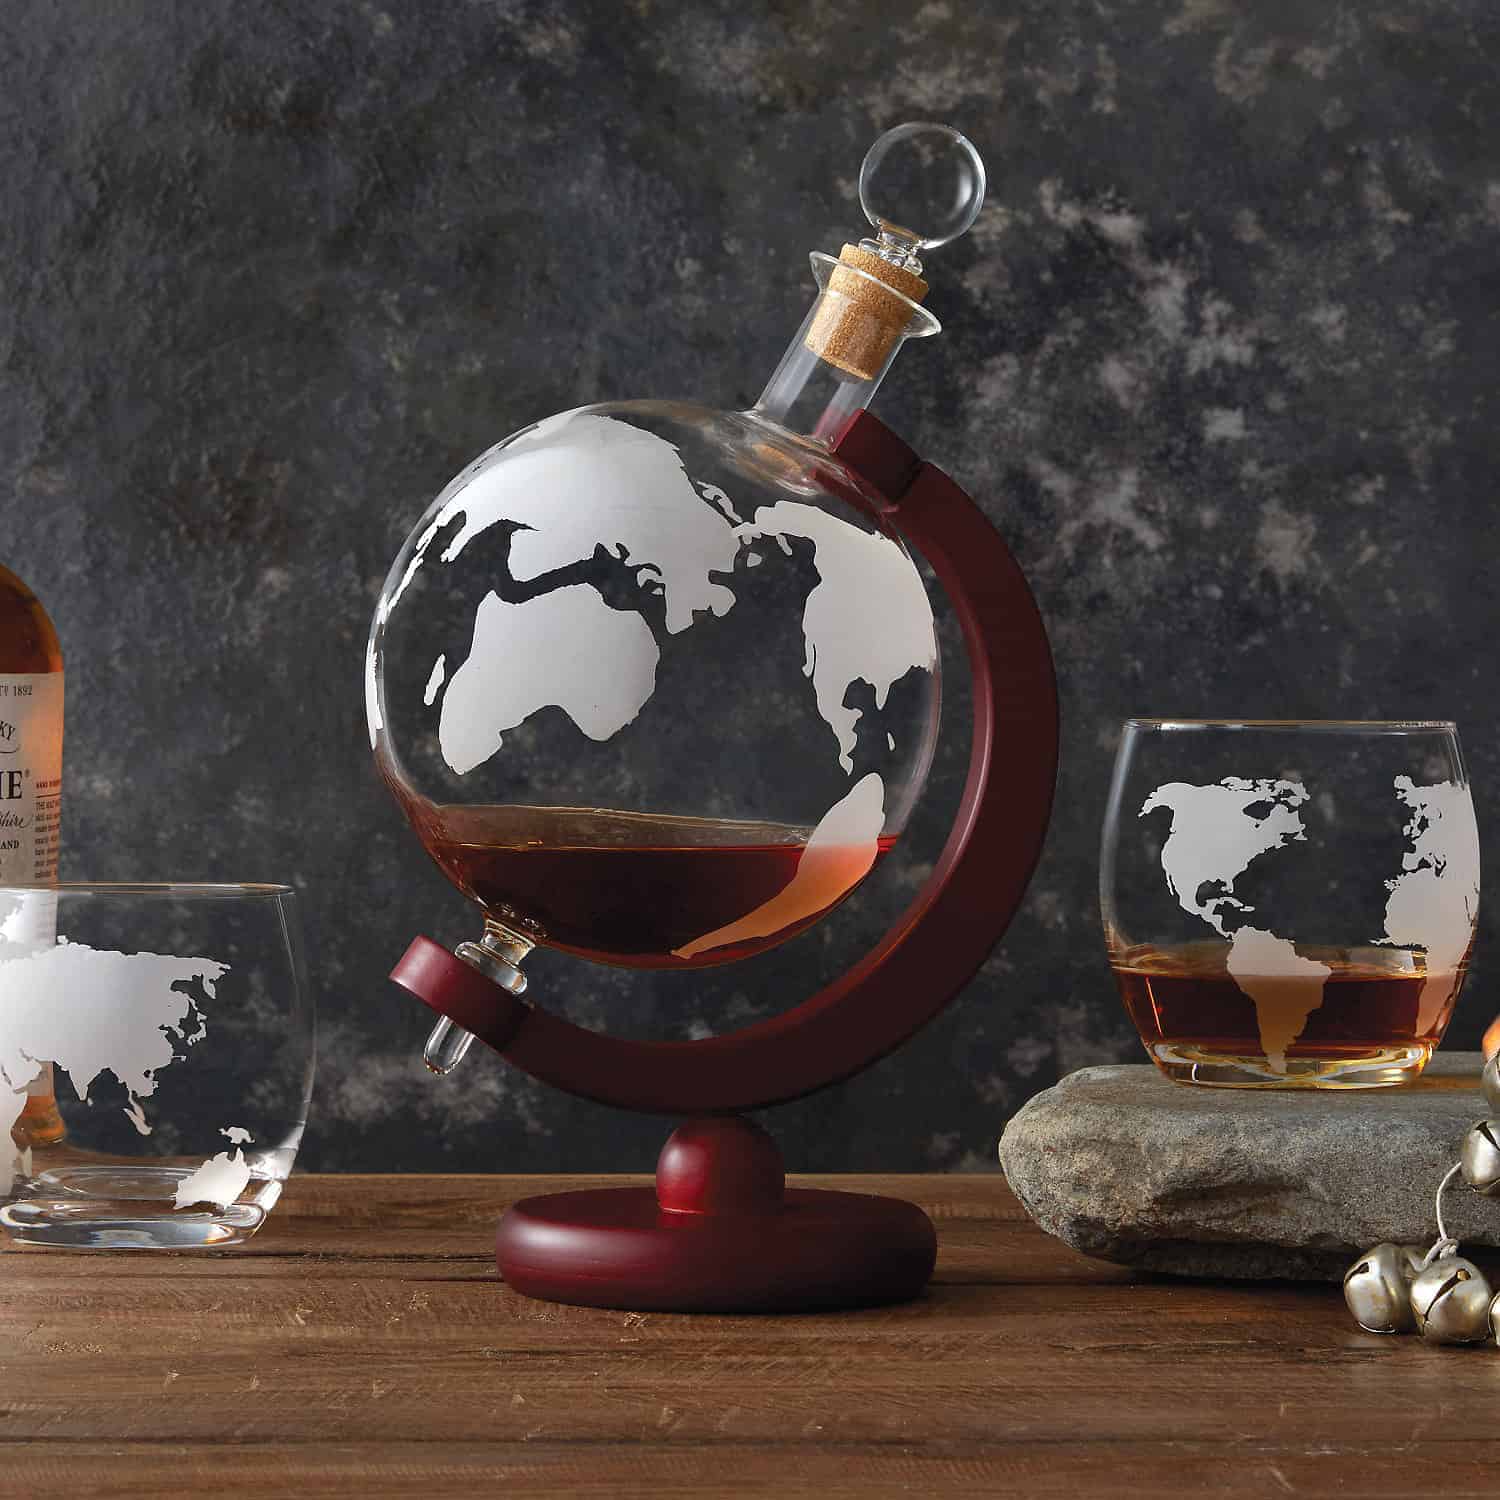 Best Wine Decanters For Your Oldest Alcoholic Beverages